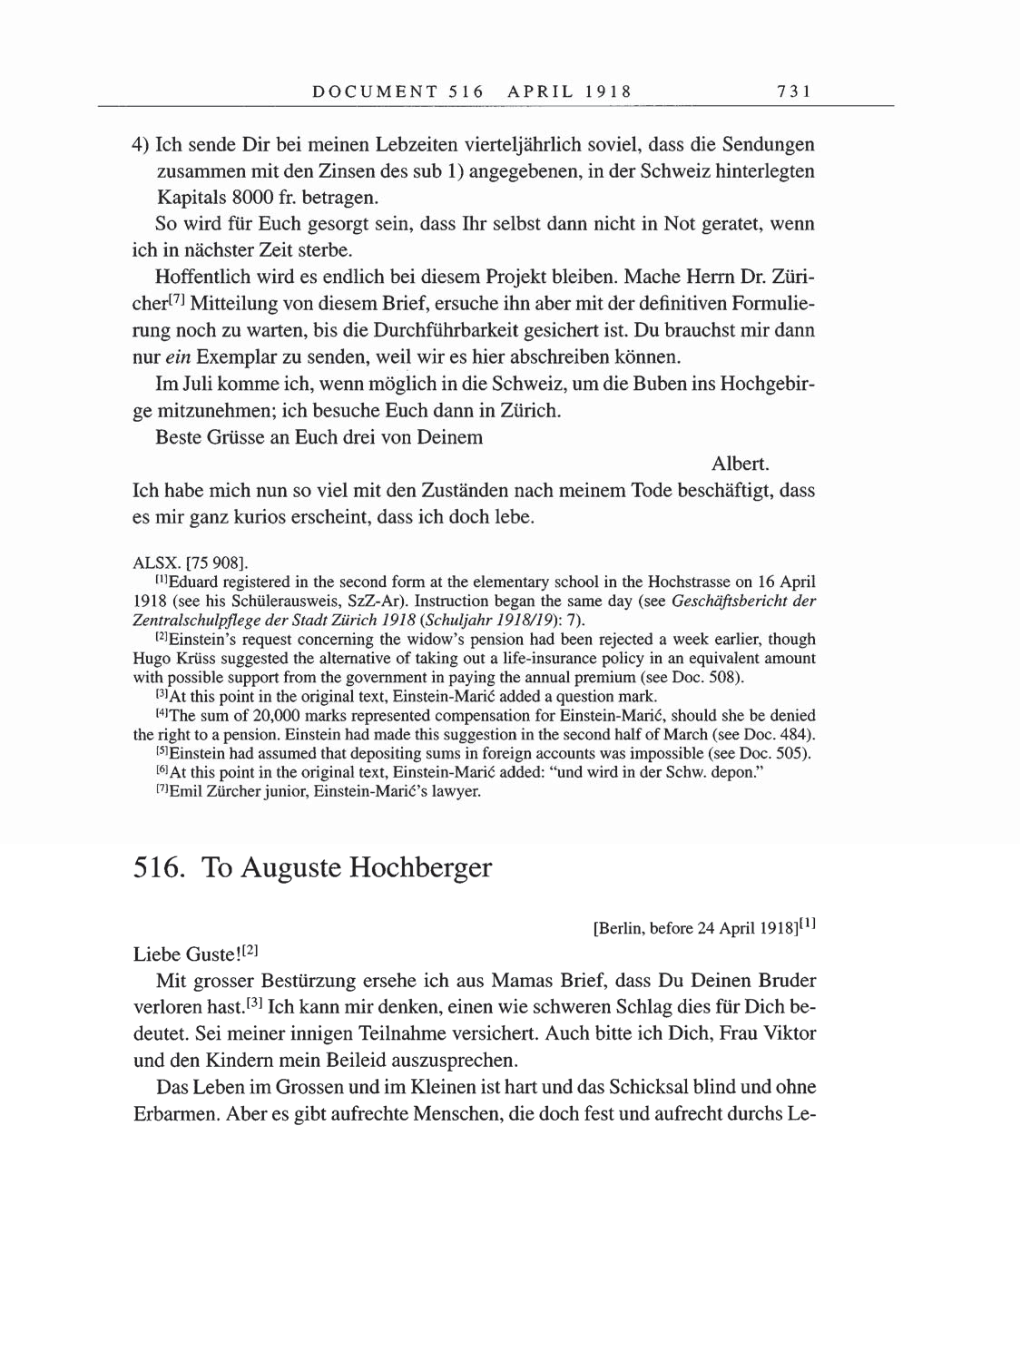 Volume 8, Part B: The Berlin Years: Correspondence 1918 page 731